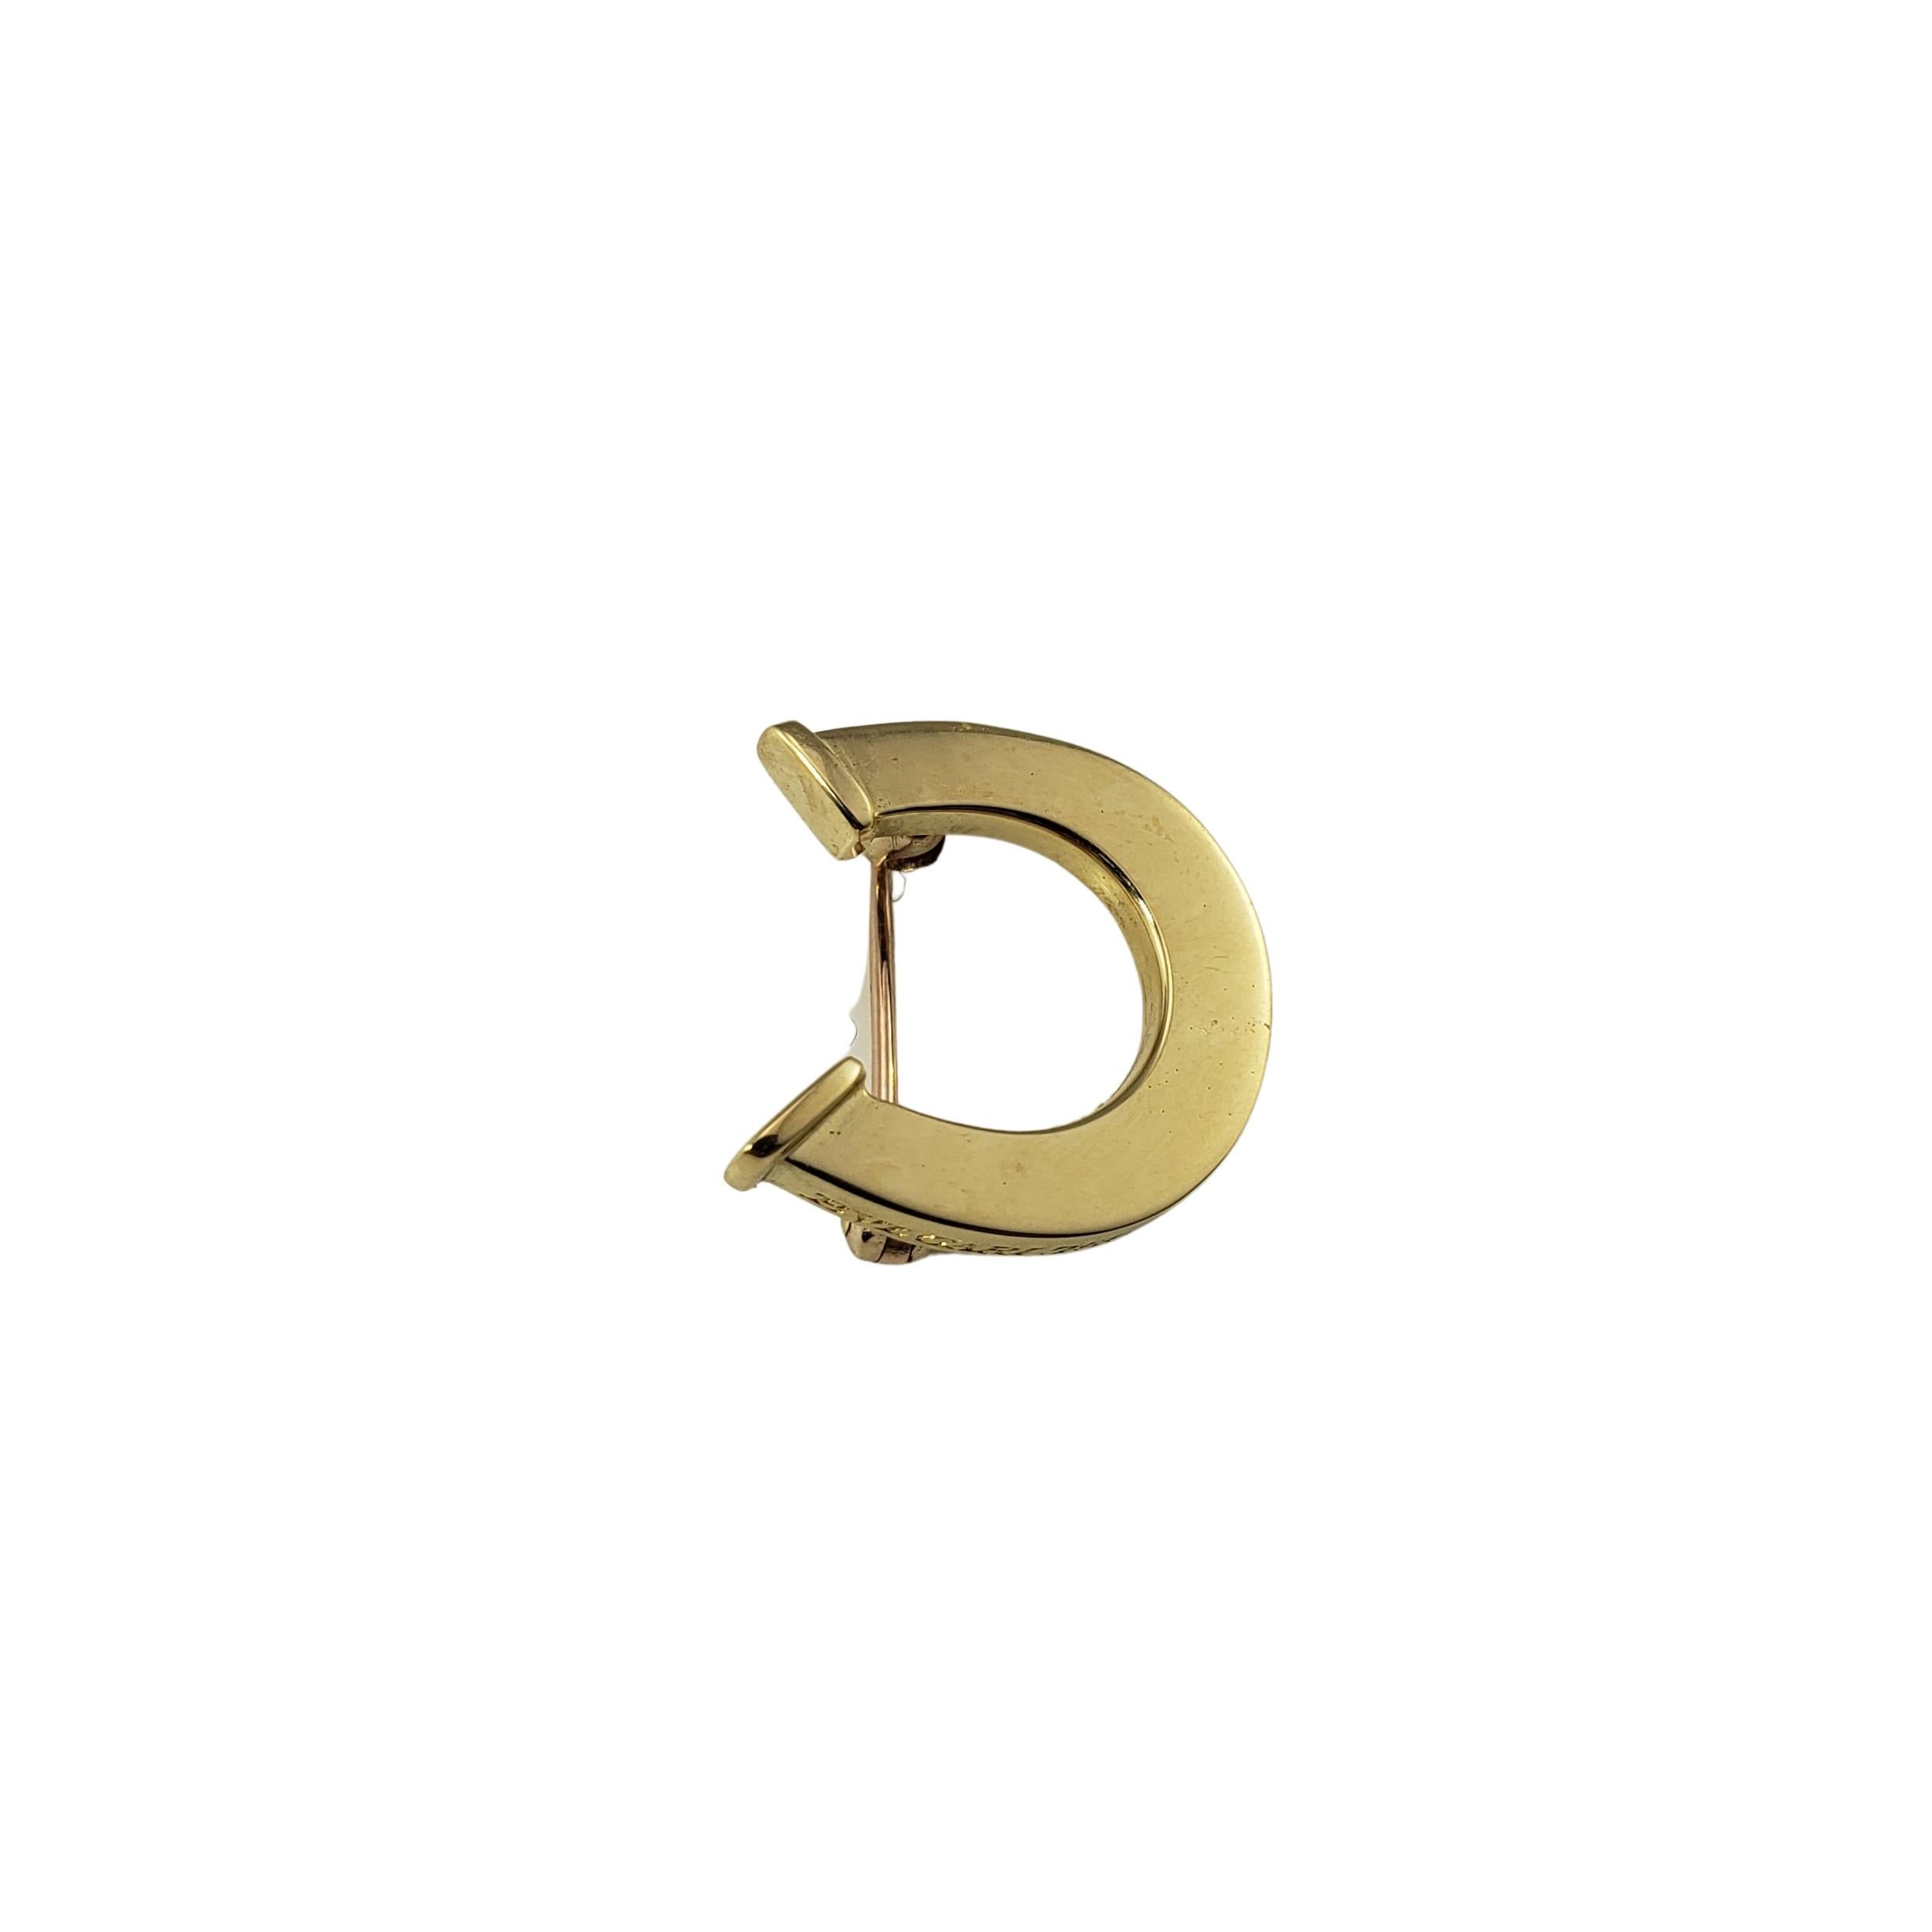 Bulgari 18 Karat Yellow Gold Horseshoe Brooch/Pin-

This lovely Bulgari brooch features a lucky horseshoe crafted in classic 18K yellow gold.

Size:  15 mm x 15 mm

Weight:  1.6 dwt. /  2.5 gr.

Hallmark:  2052  BVLGARI  750

Very good condition,